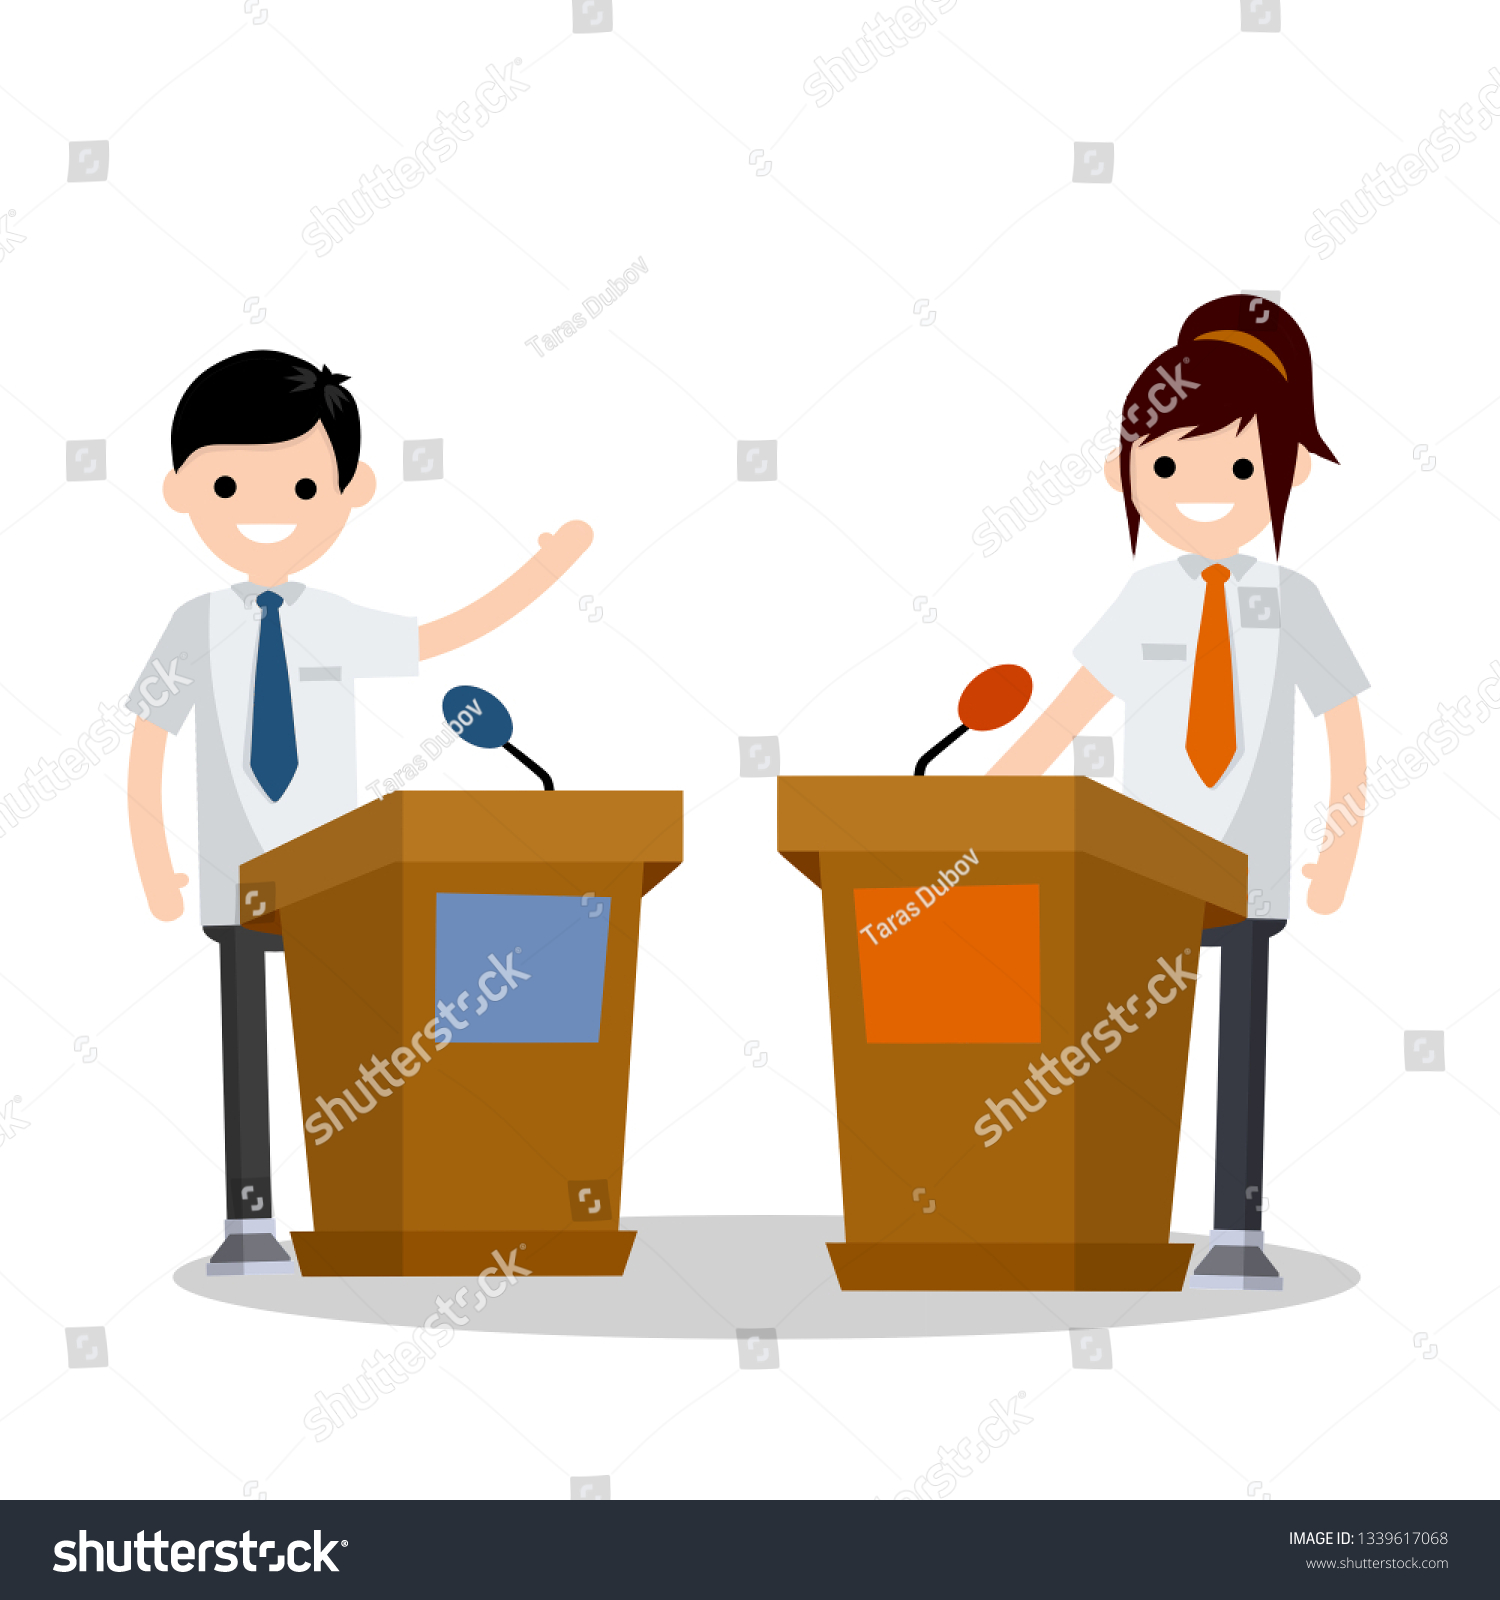 SVG of Presidential debate. Dialogue between man and woman behind the podium. speech of lecturer at lectures. Political election and voting. Controversy girl and guy in suits. Red vs blue. Flat cartoon svg